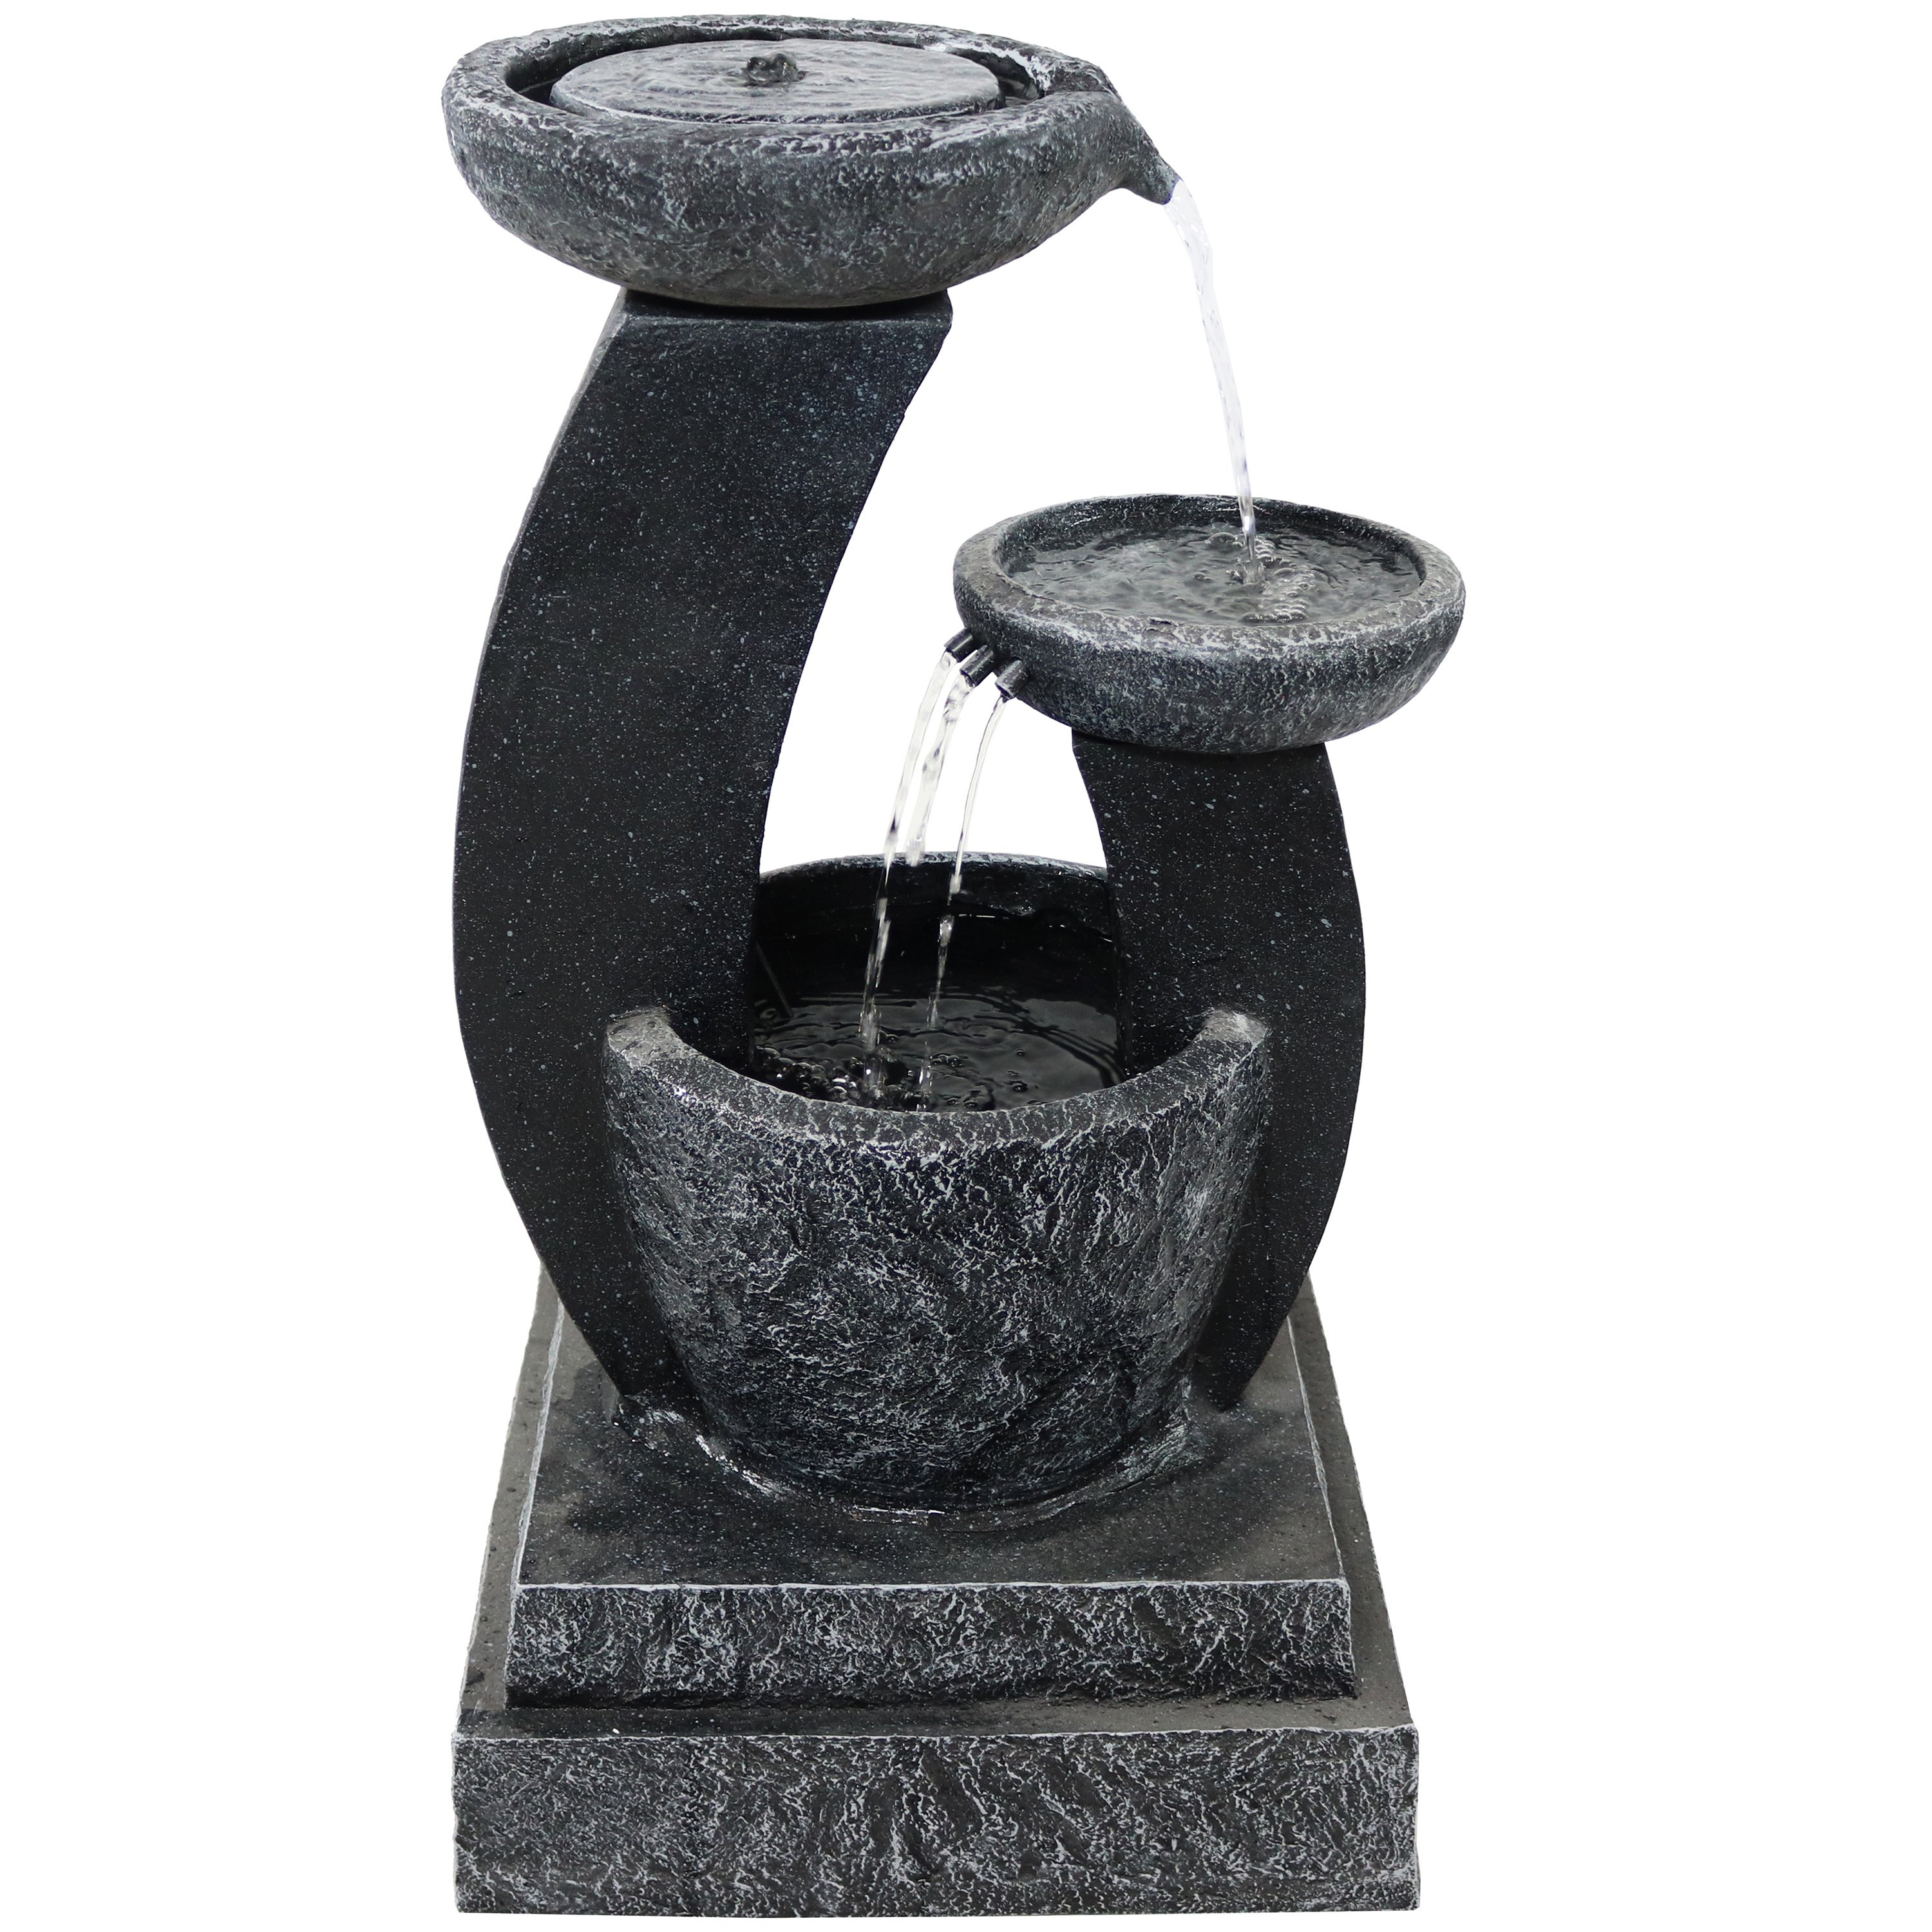 Sunnydaze Modern Cascading Bowls Solar Water Fountain with Battery Backup, 28 Inch Tall, No